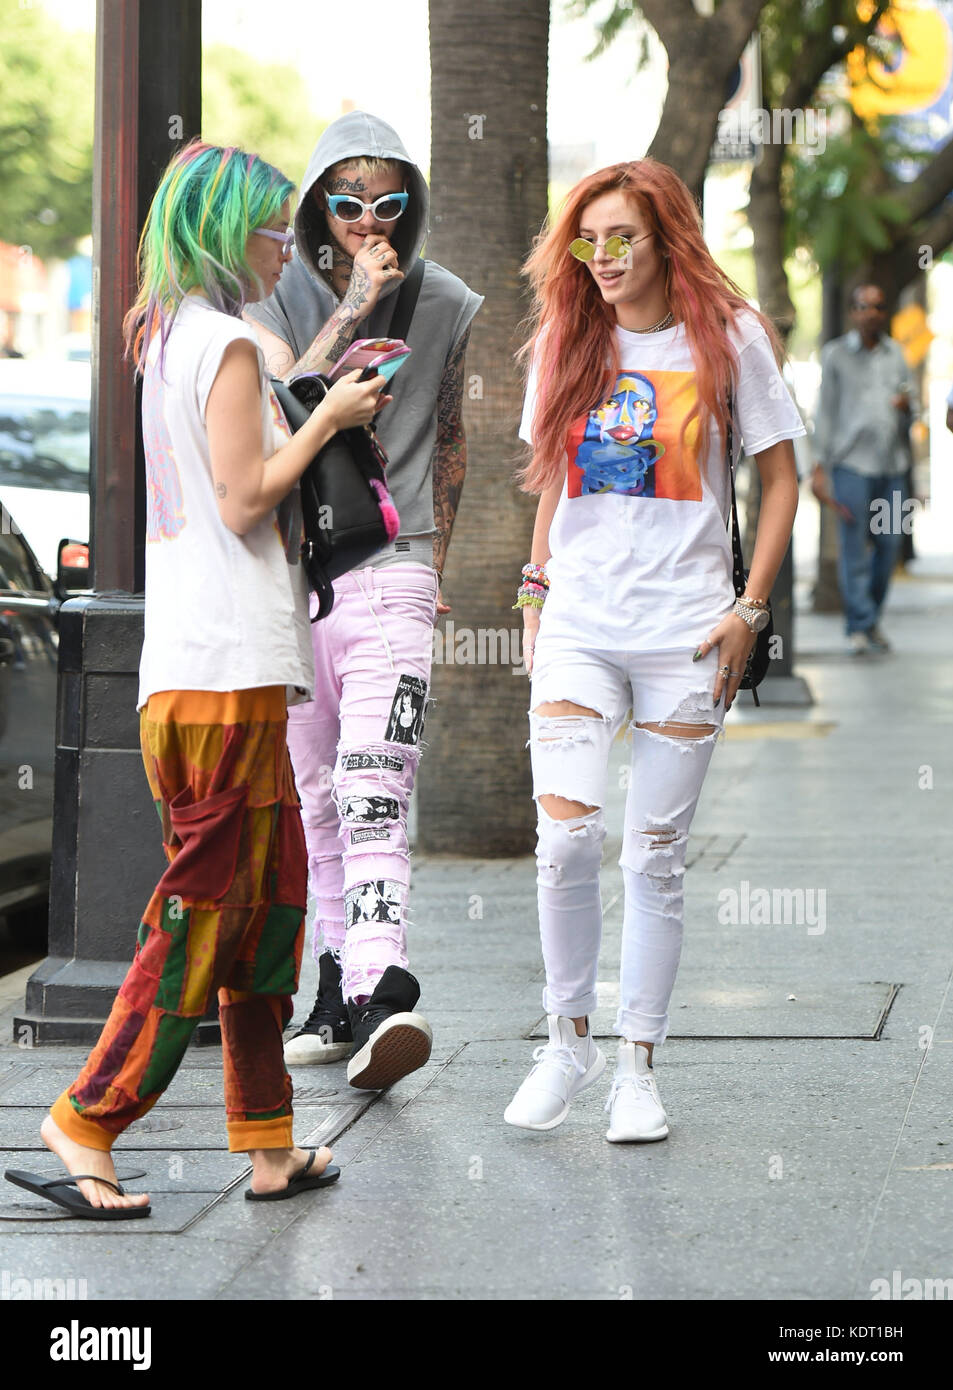 Bella Thorne meets Lil Peep to do some shopping in Hollywood Featuring:  Bella Thorne, Dani Thorne,